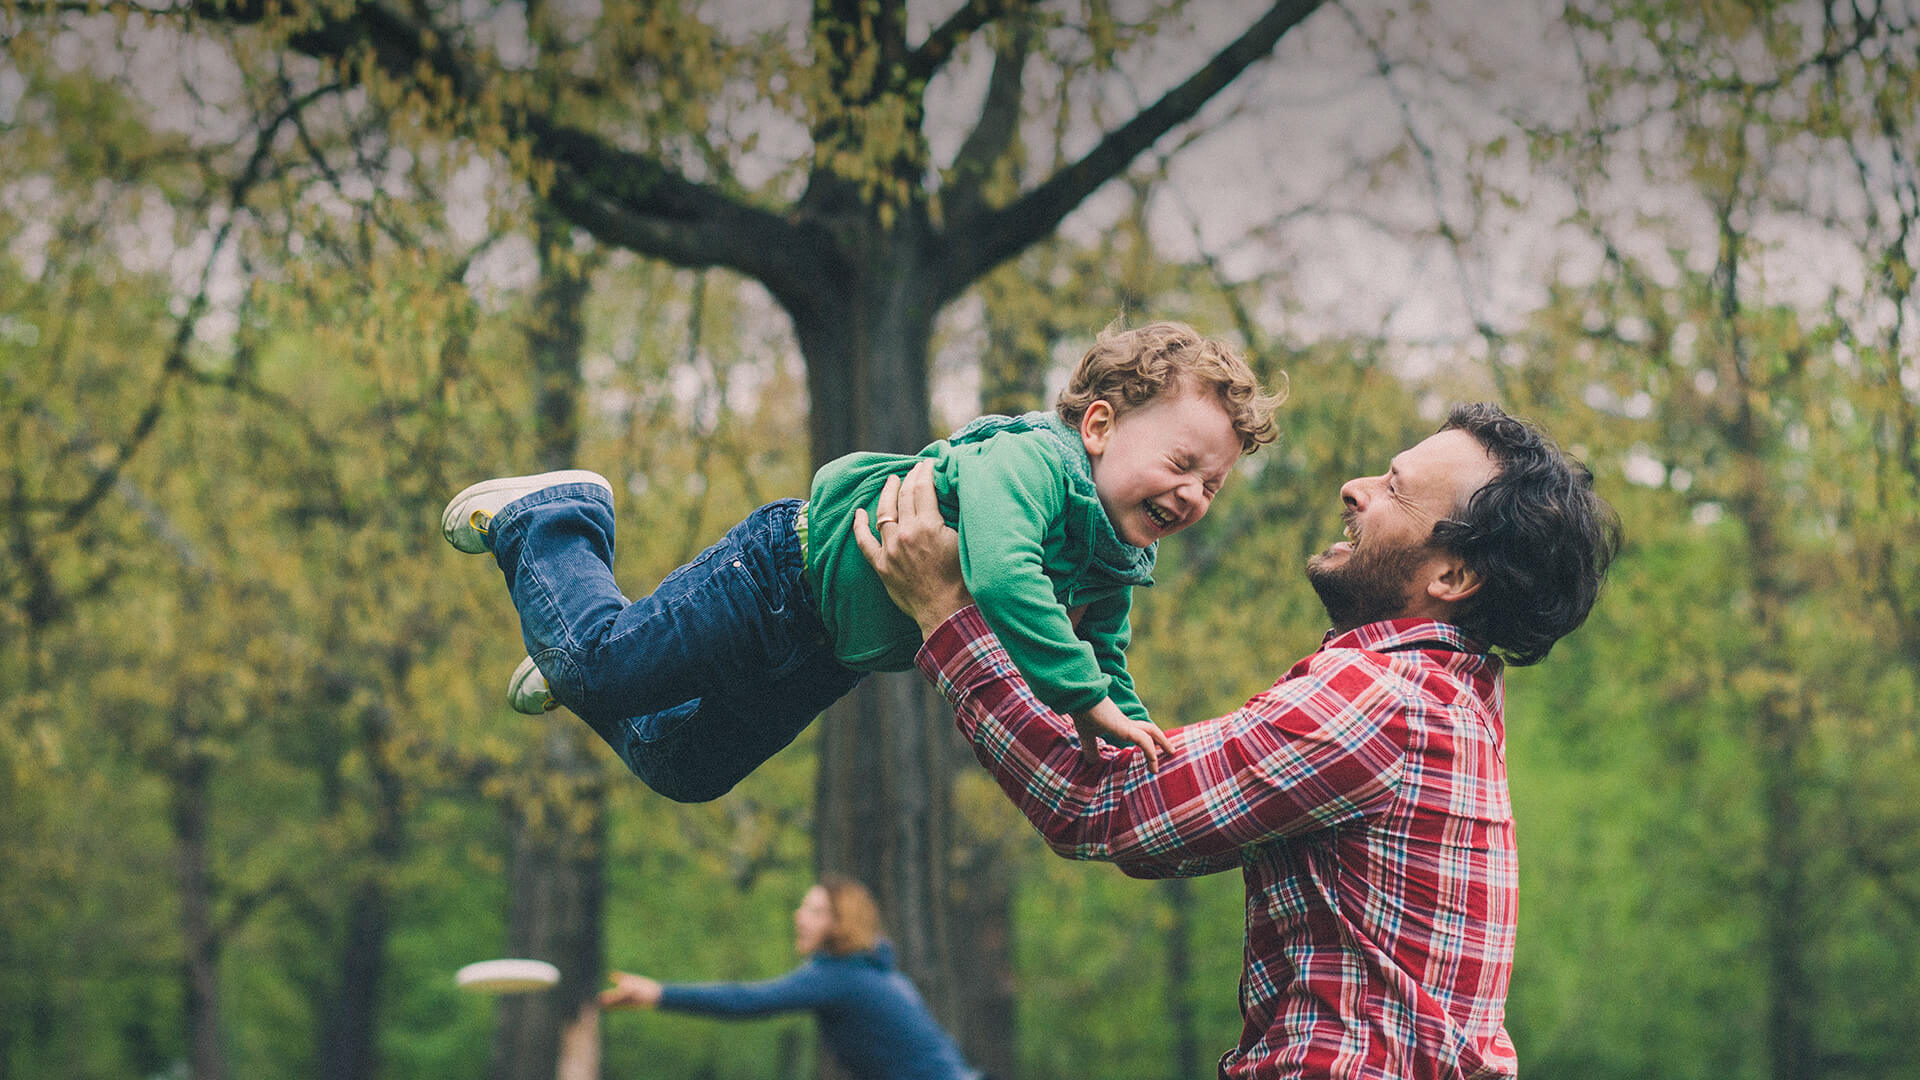 Single parent dating symbolized by a single dad who is tossing his little son in the air on a playground in canada